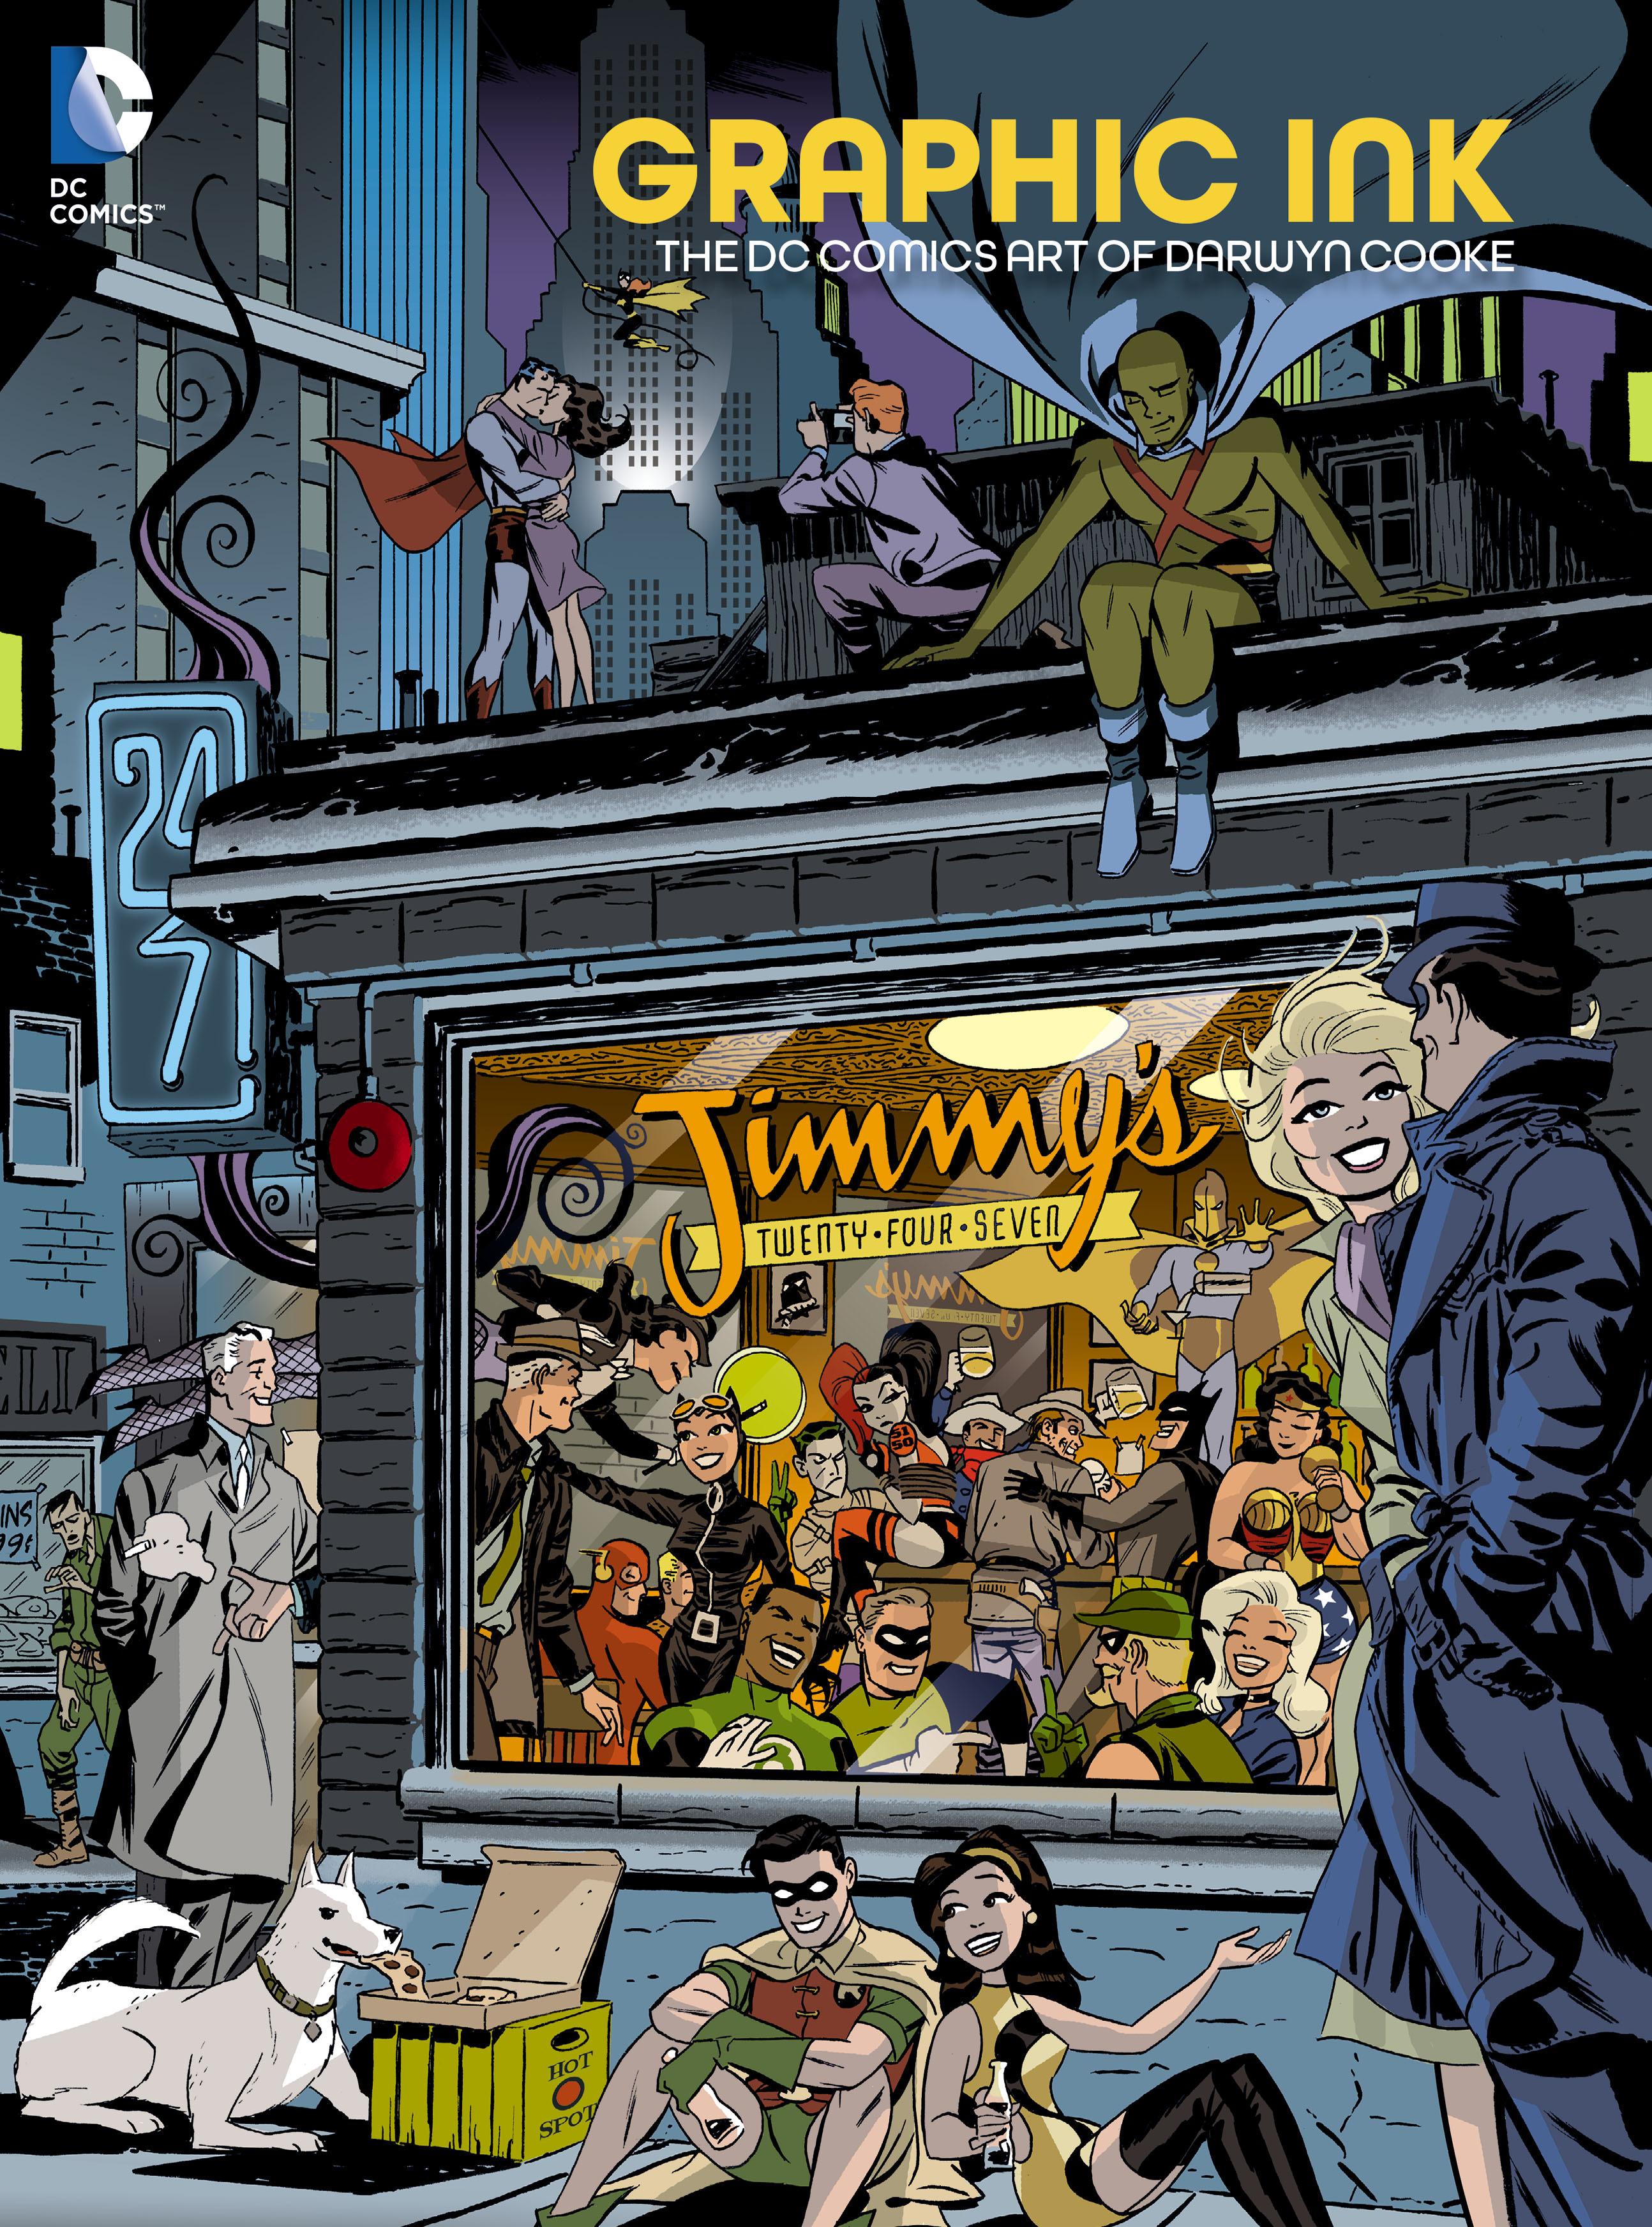 Read online Graphic Ink: The DC Comics Art of Darwyn Cooke comic -  Issue # TPB (Part 1) - 1